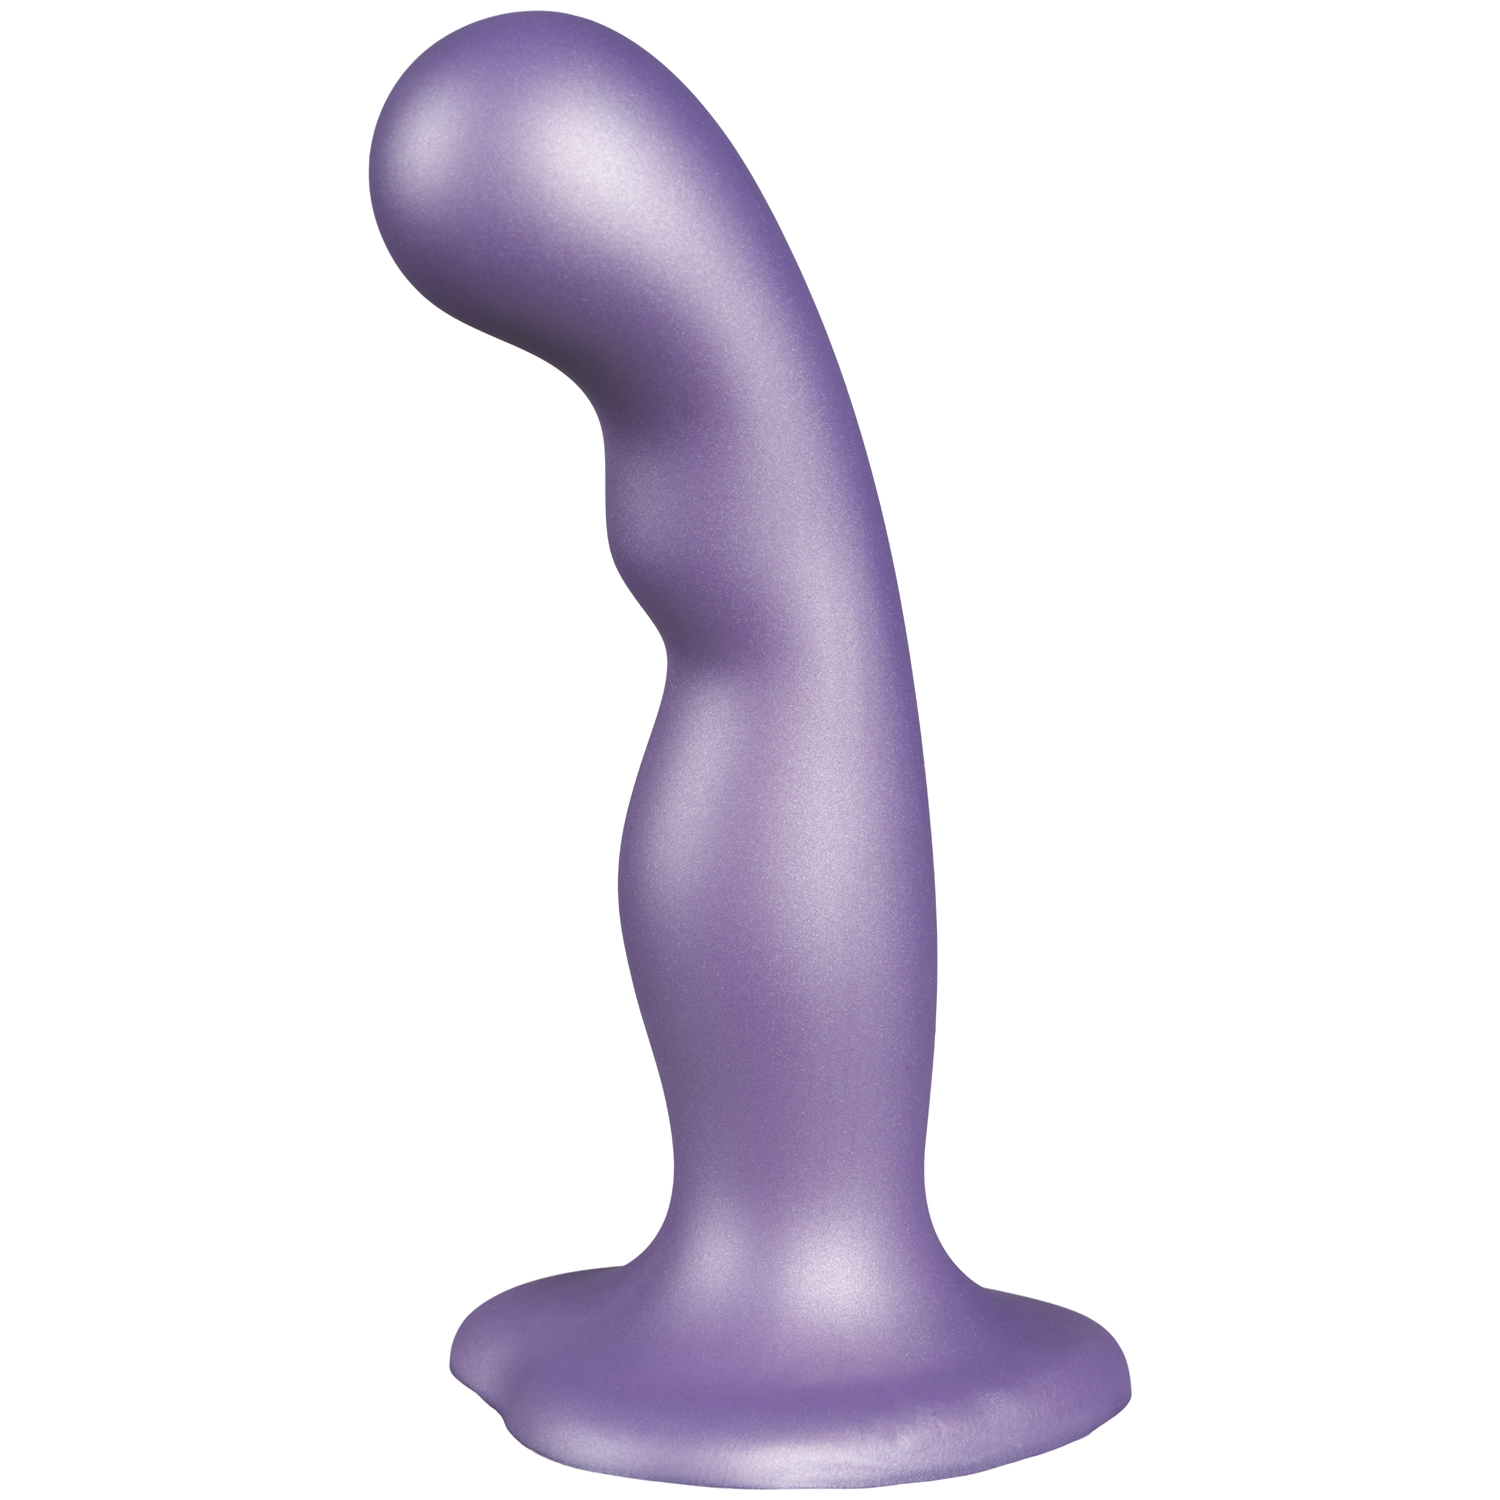 Strap-On-Me P&G Dildoplugg - Lila - S